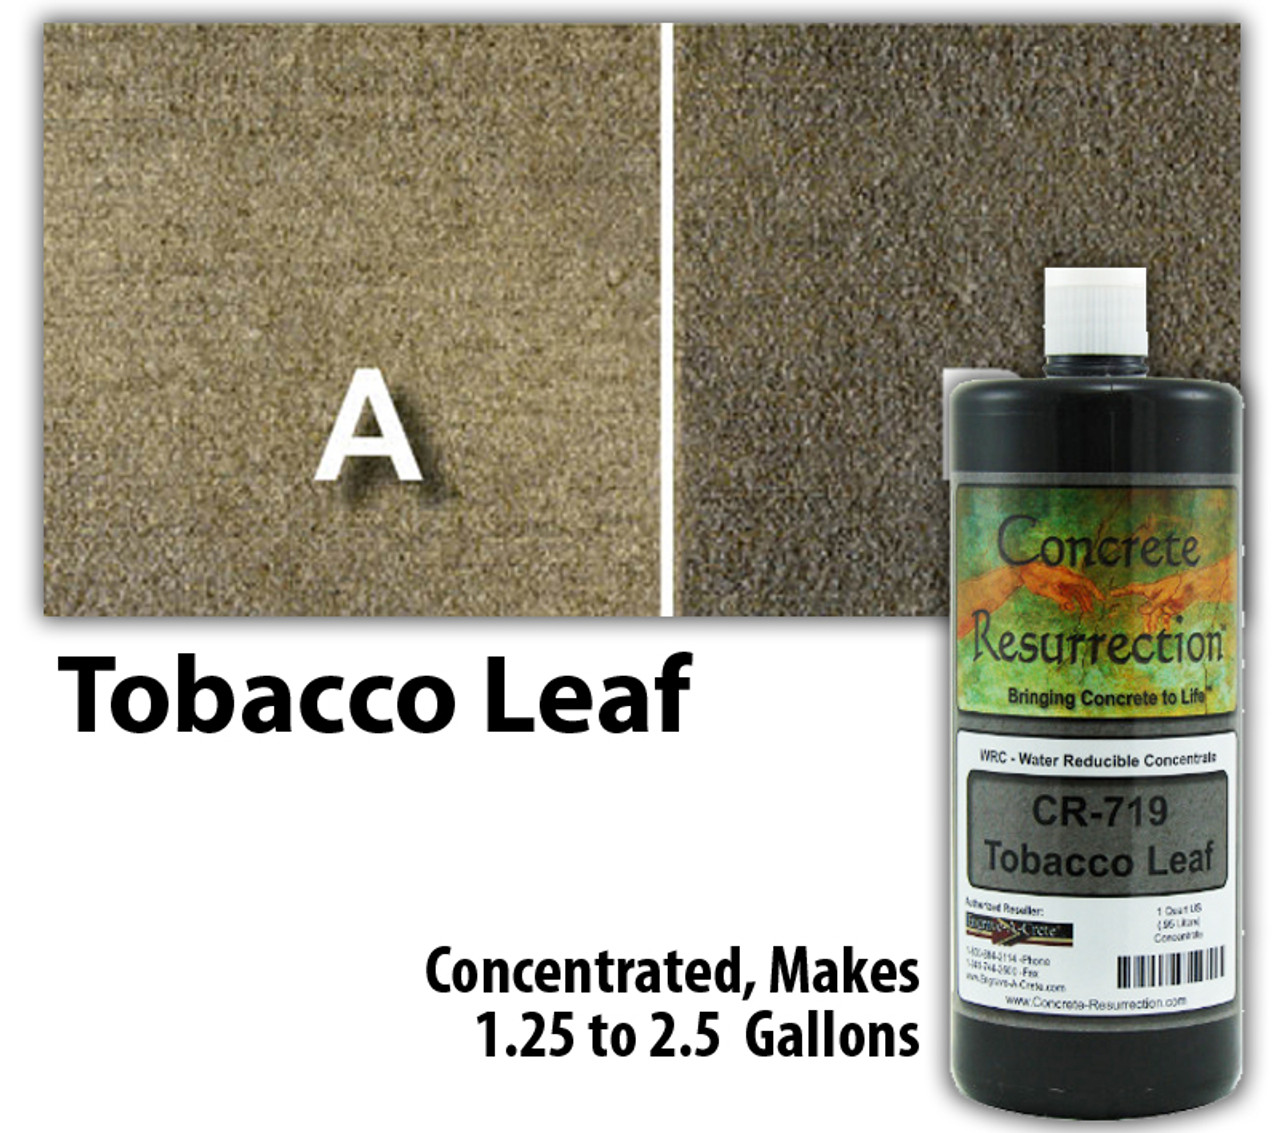 Water Reducible Concentrated (WRC) Concrete Stain - Tobacco Leaf 32oz